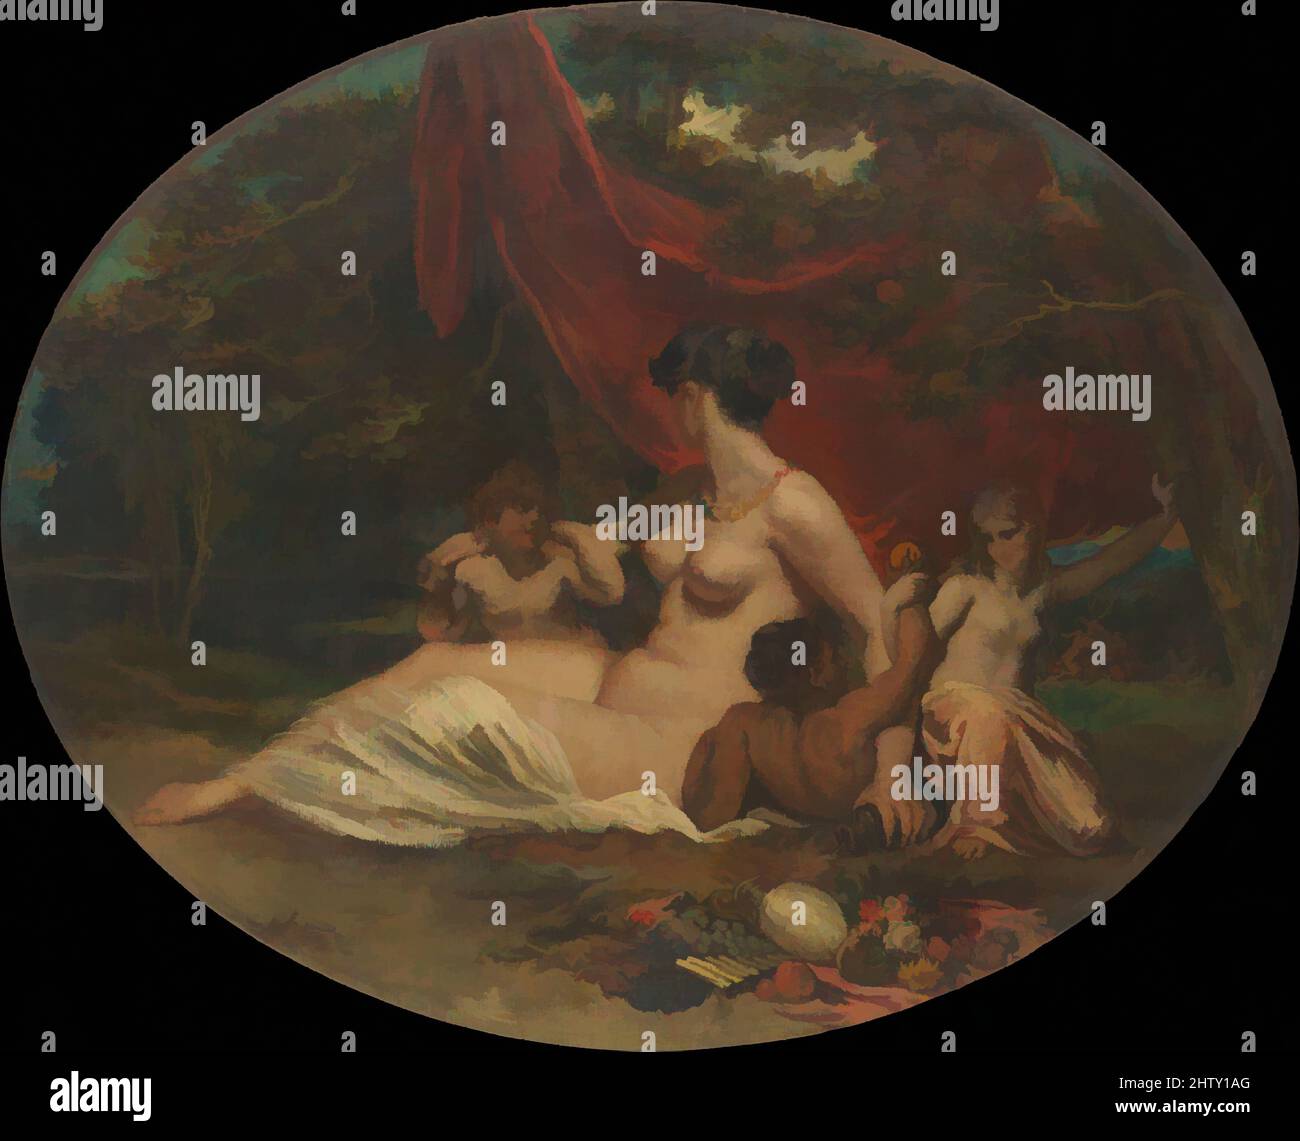 Art inspired by Allegory, Oil on canvas, laid down on wood, Oval, 28 x 34 1/2 in. (71.1 x 87.6 cm), Paintings, William Etty (British, York 1787–1849 York, Classic works modernized by Artotop with a splash of modernity. Shapes, color and value, eye-catching visual impact on art. Emotions through freedom of artworks in a contemporary way. A timeless message pursuing a wildly creative new direction. Artists turning to the digital medium and creating the Artotop NFT Stock Photo